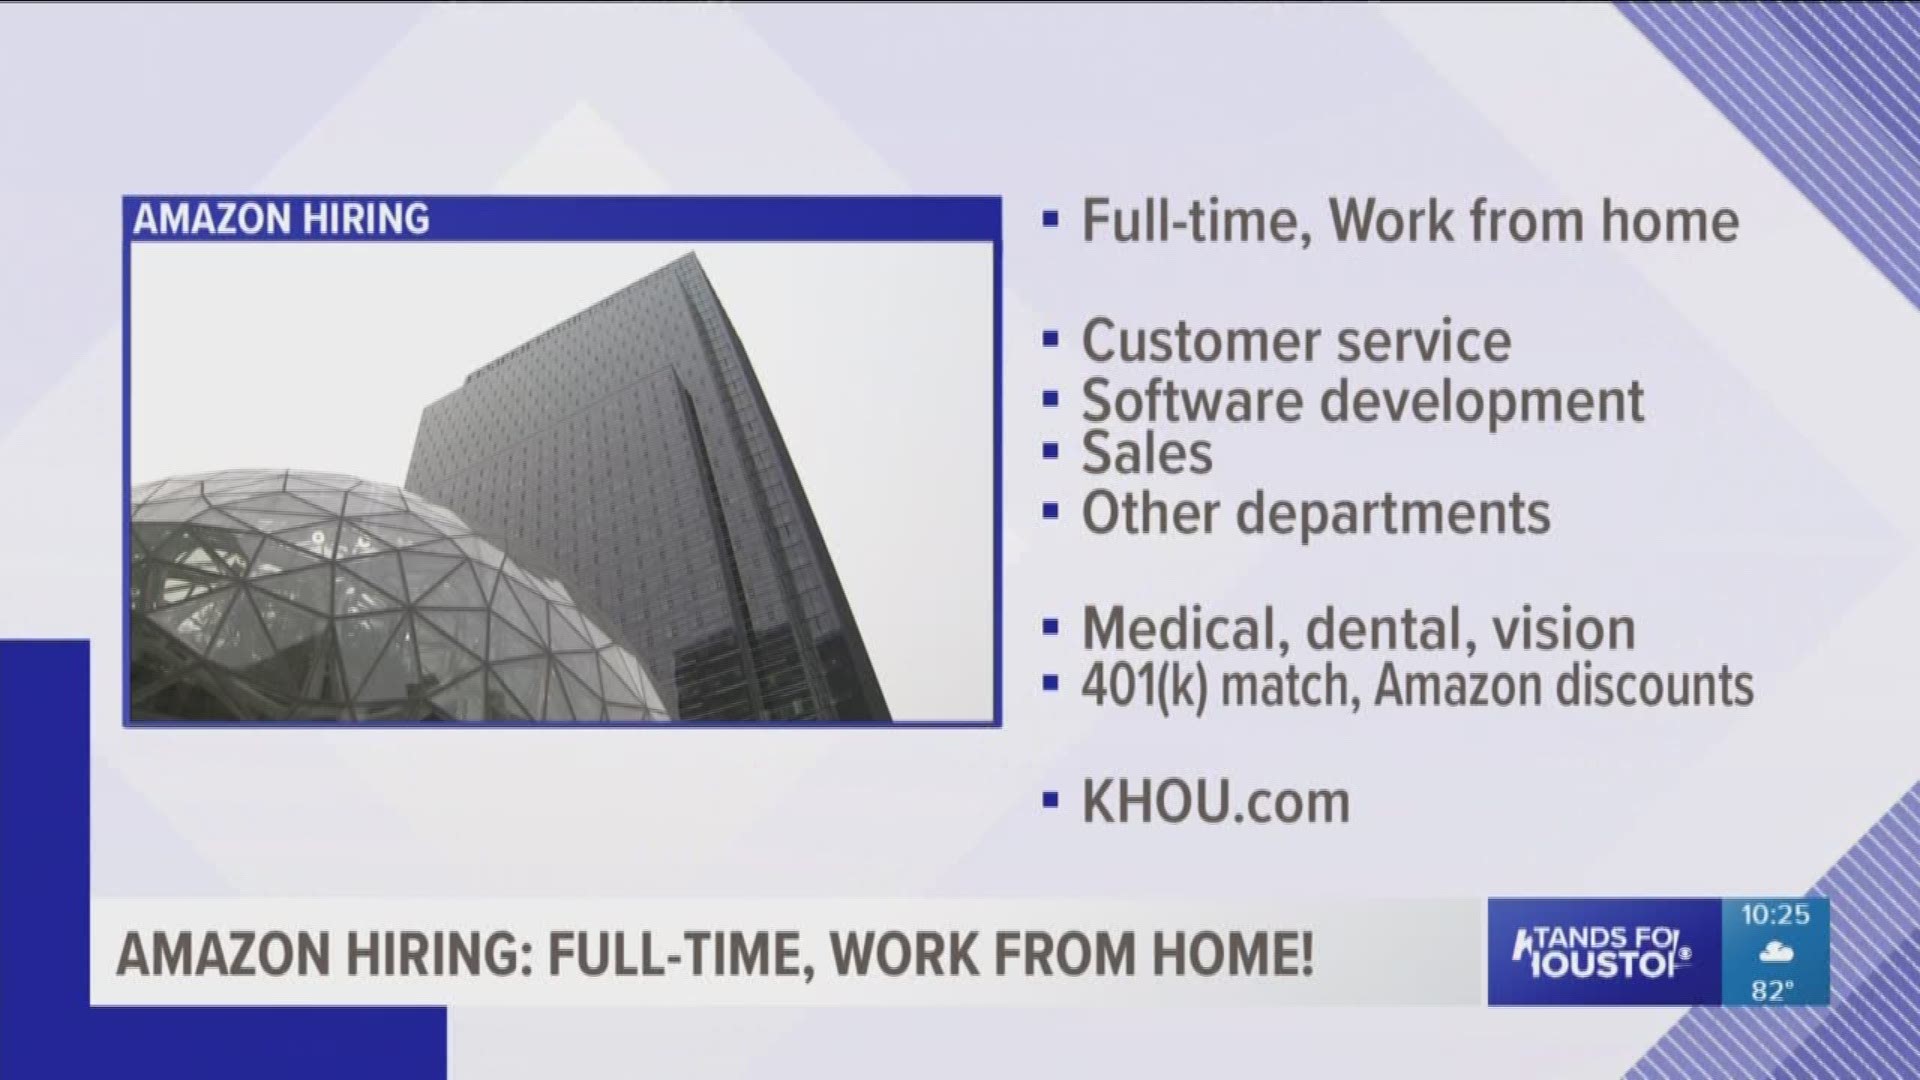 Amazon is looking to fill more than 200 jobs, and most of them are full-time positions.